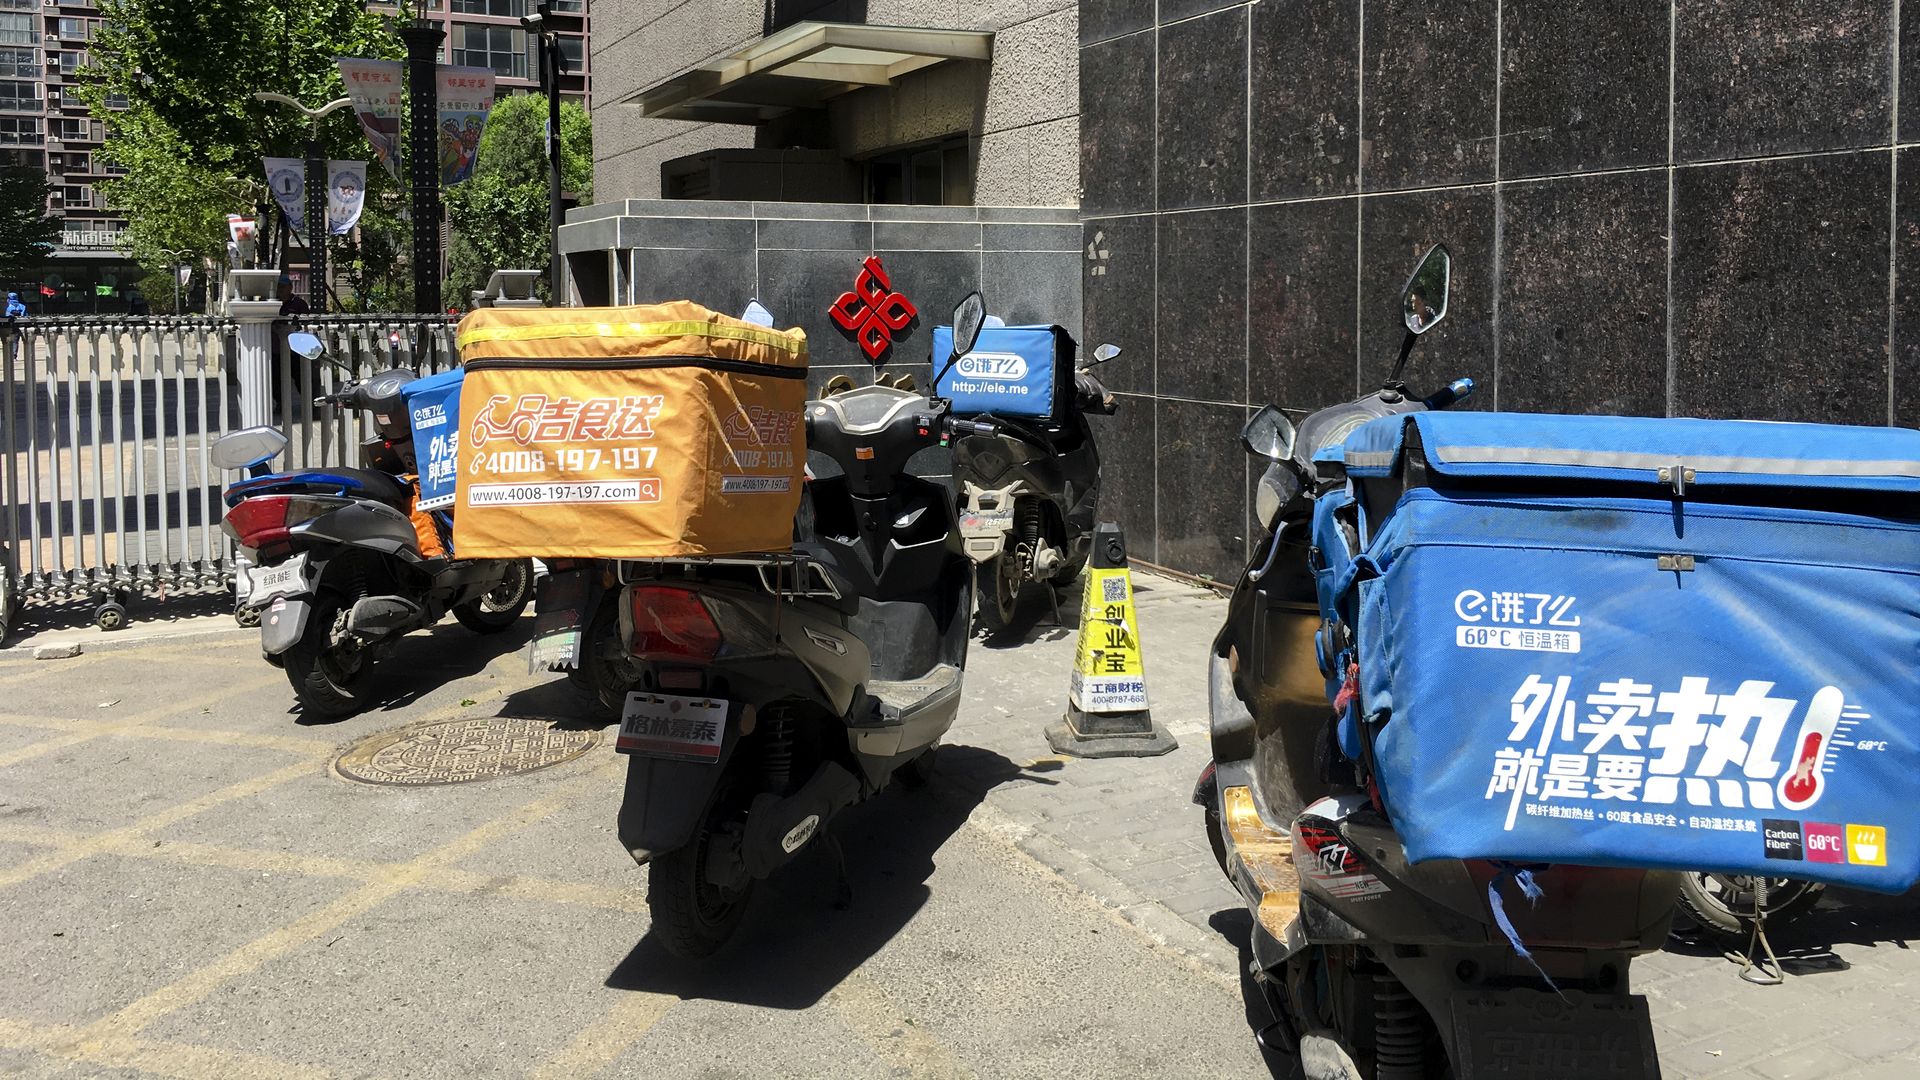 Motorcycles with food delivery packages parked in Beijing